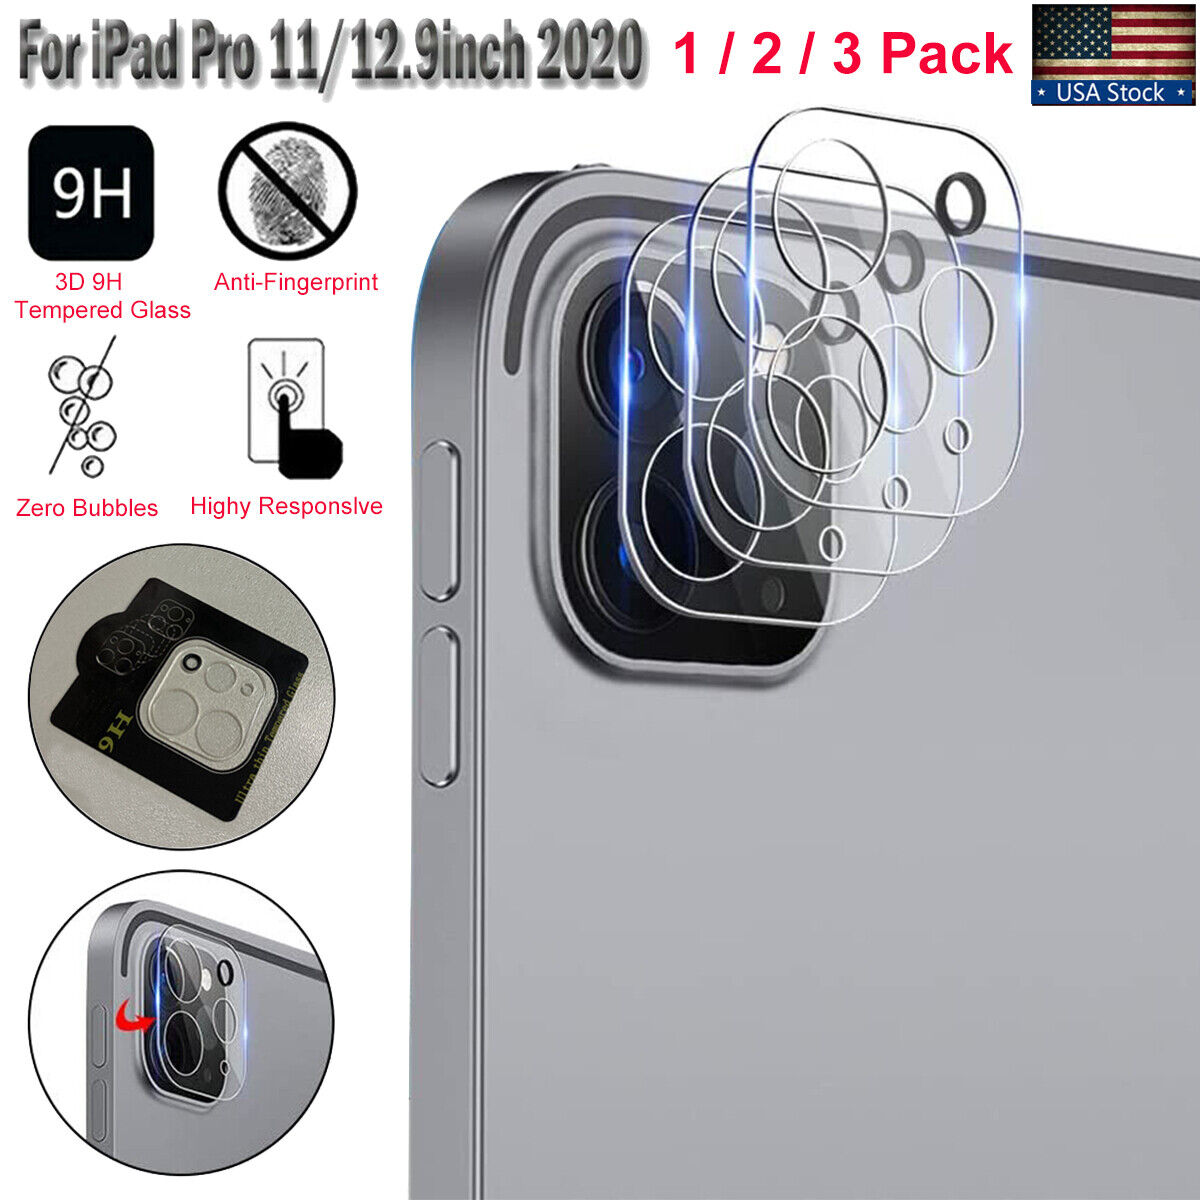 3D Full Tempered Glass Camera Fixed price for sale Max 61% OFF Lens iPad Protector Screen Pro